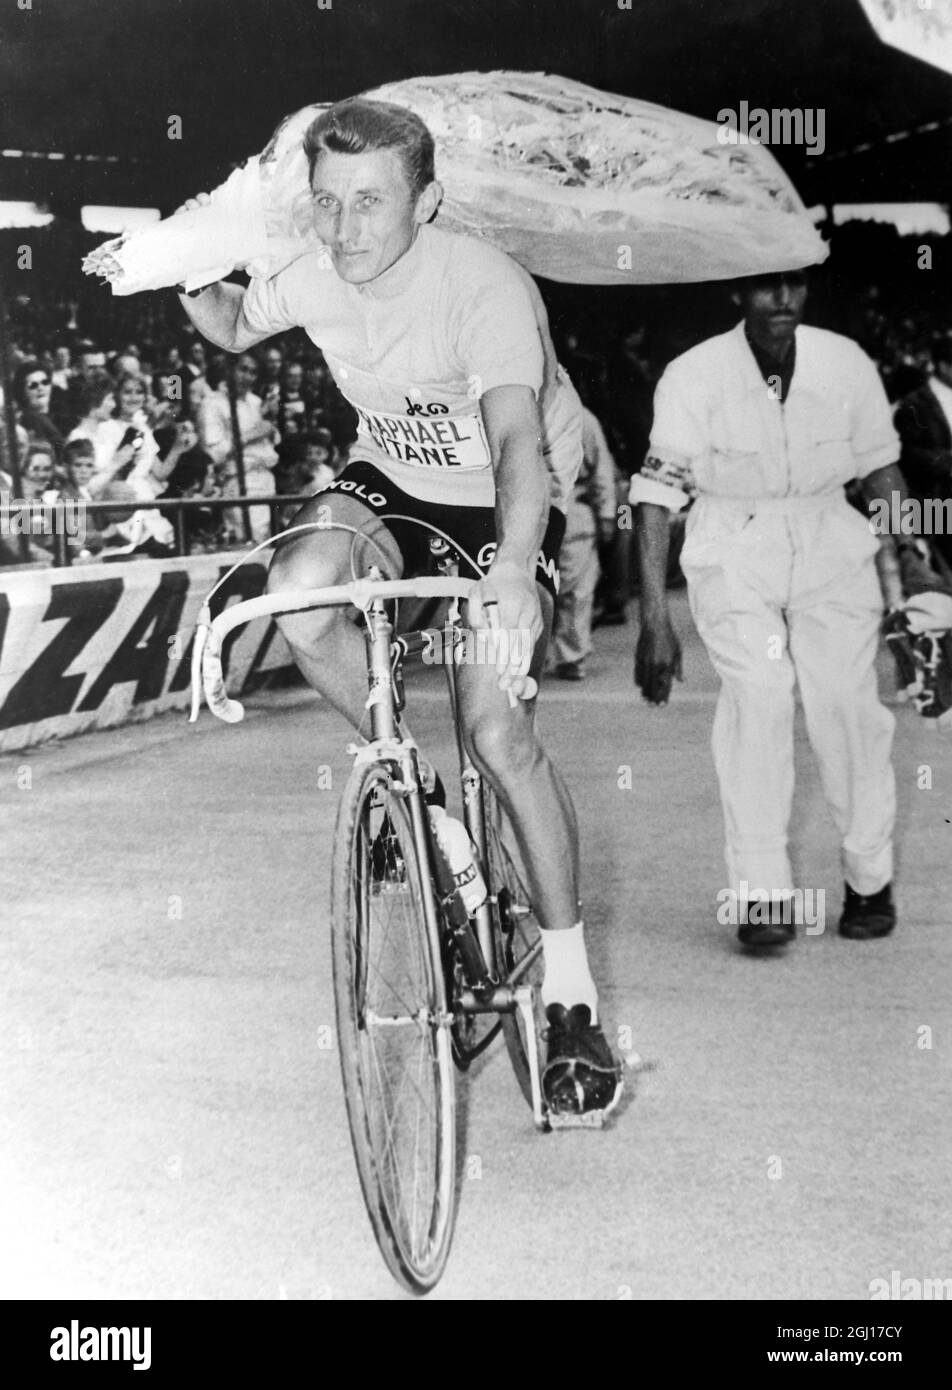 15 JULY 1963 JACQUES ANQUETIL RIDES HIS BICYCLE WITH A BOUQUET OF FLOWERS AFTER WINNING THE TOUR DE FRANCE, PARIS, FRANCE. Stock Photo